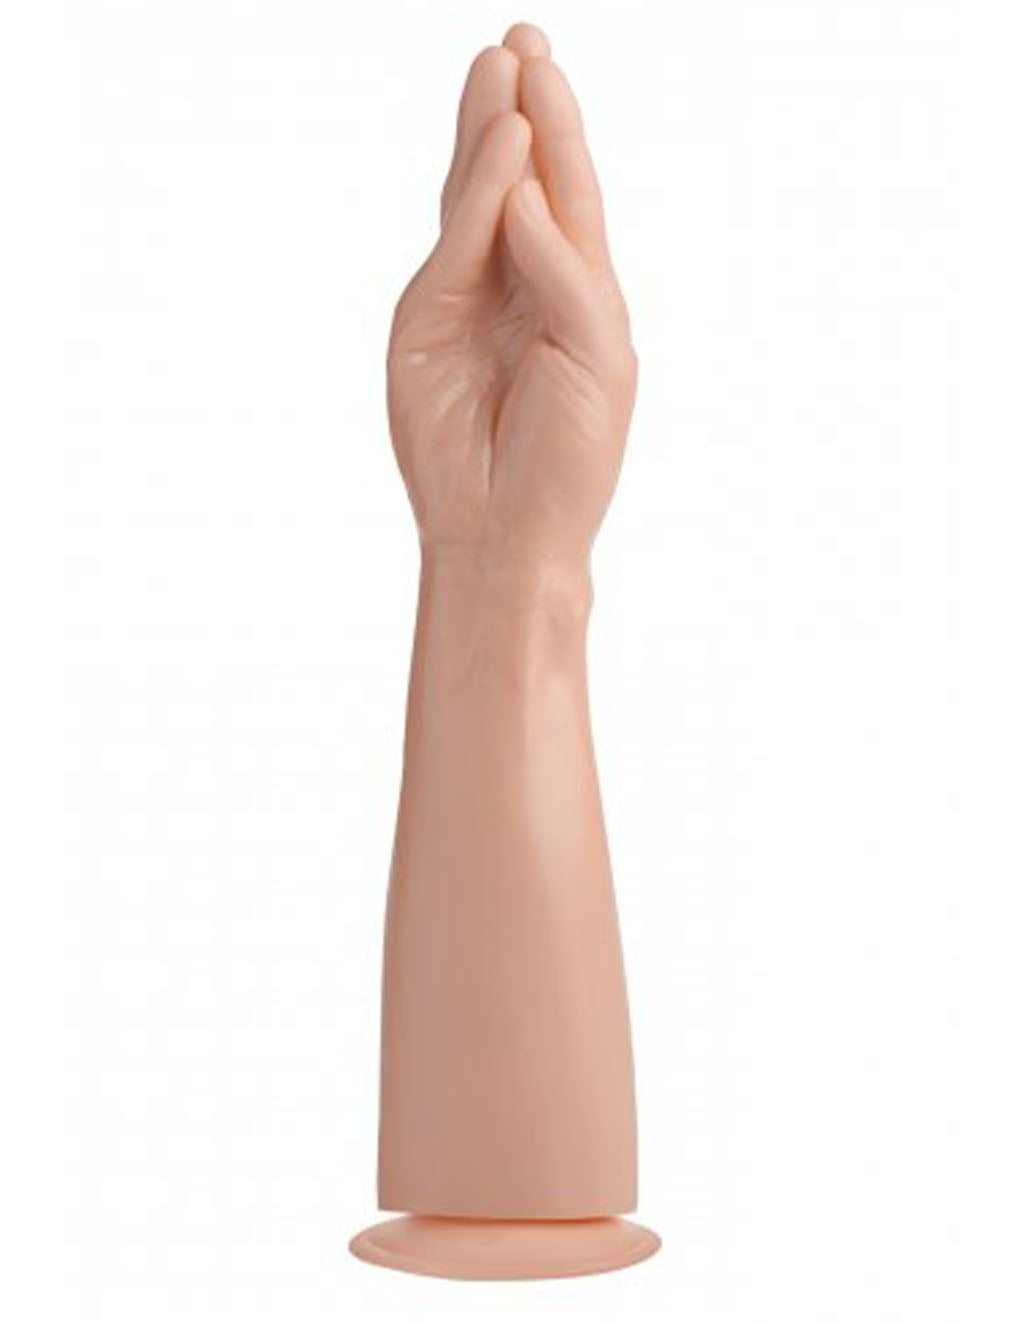 The Fister Hand and Forearm Dildo. Slide 1